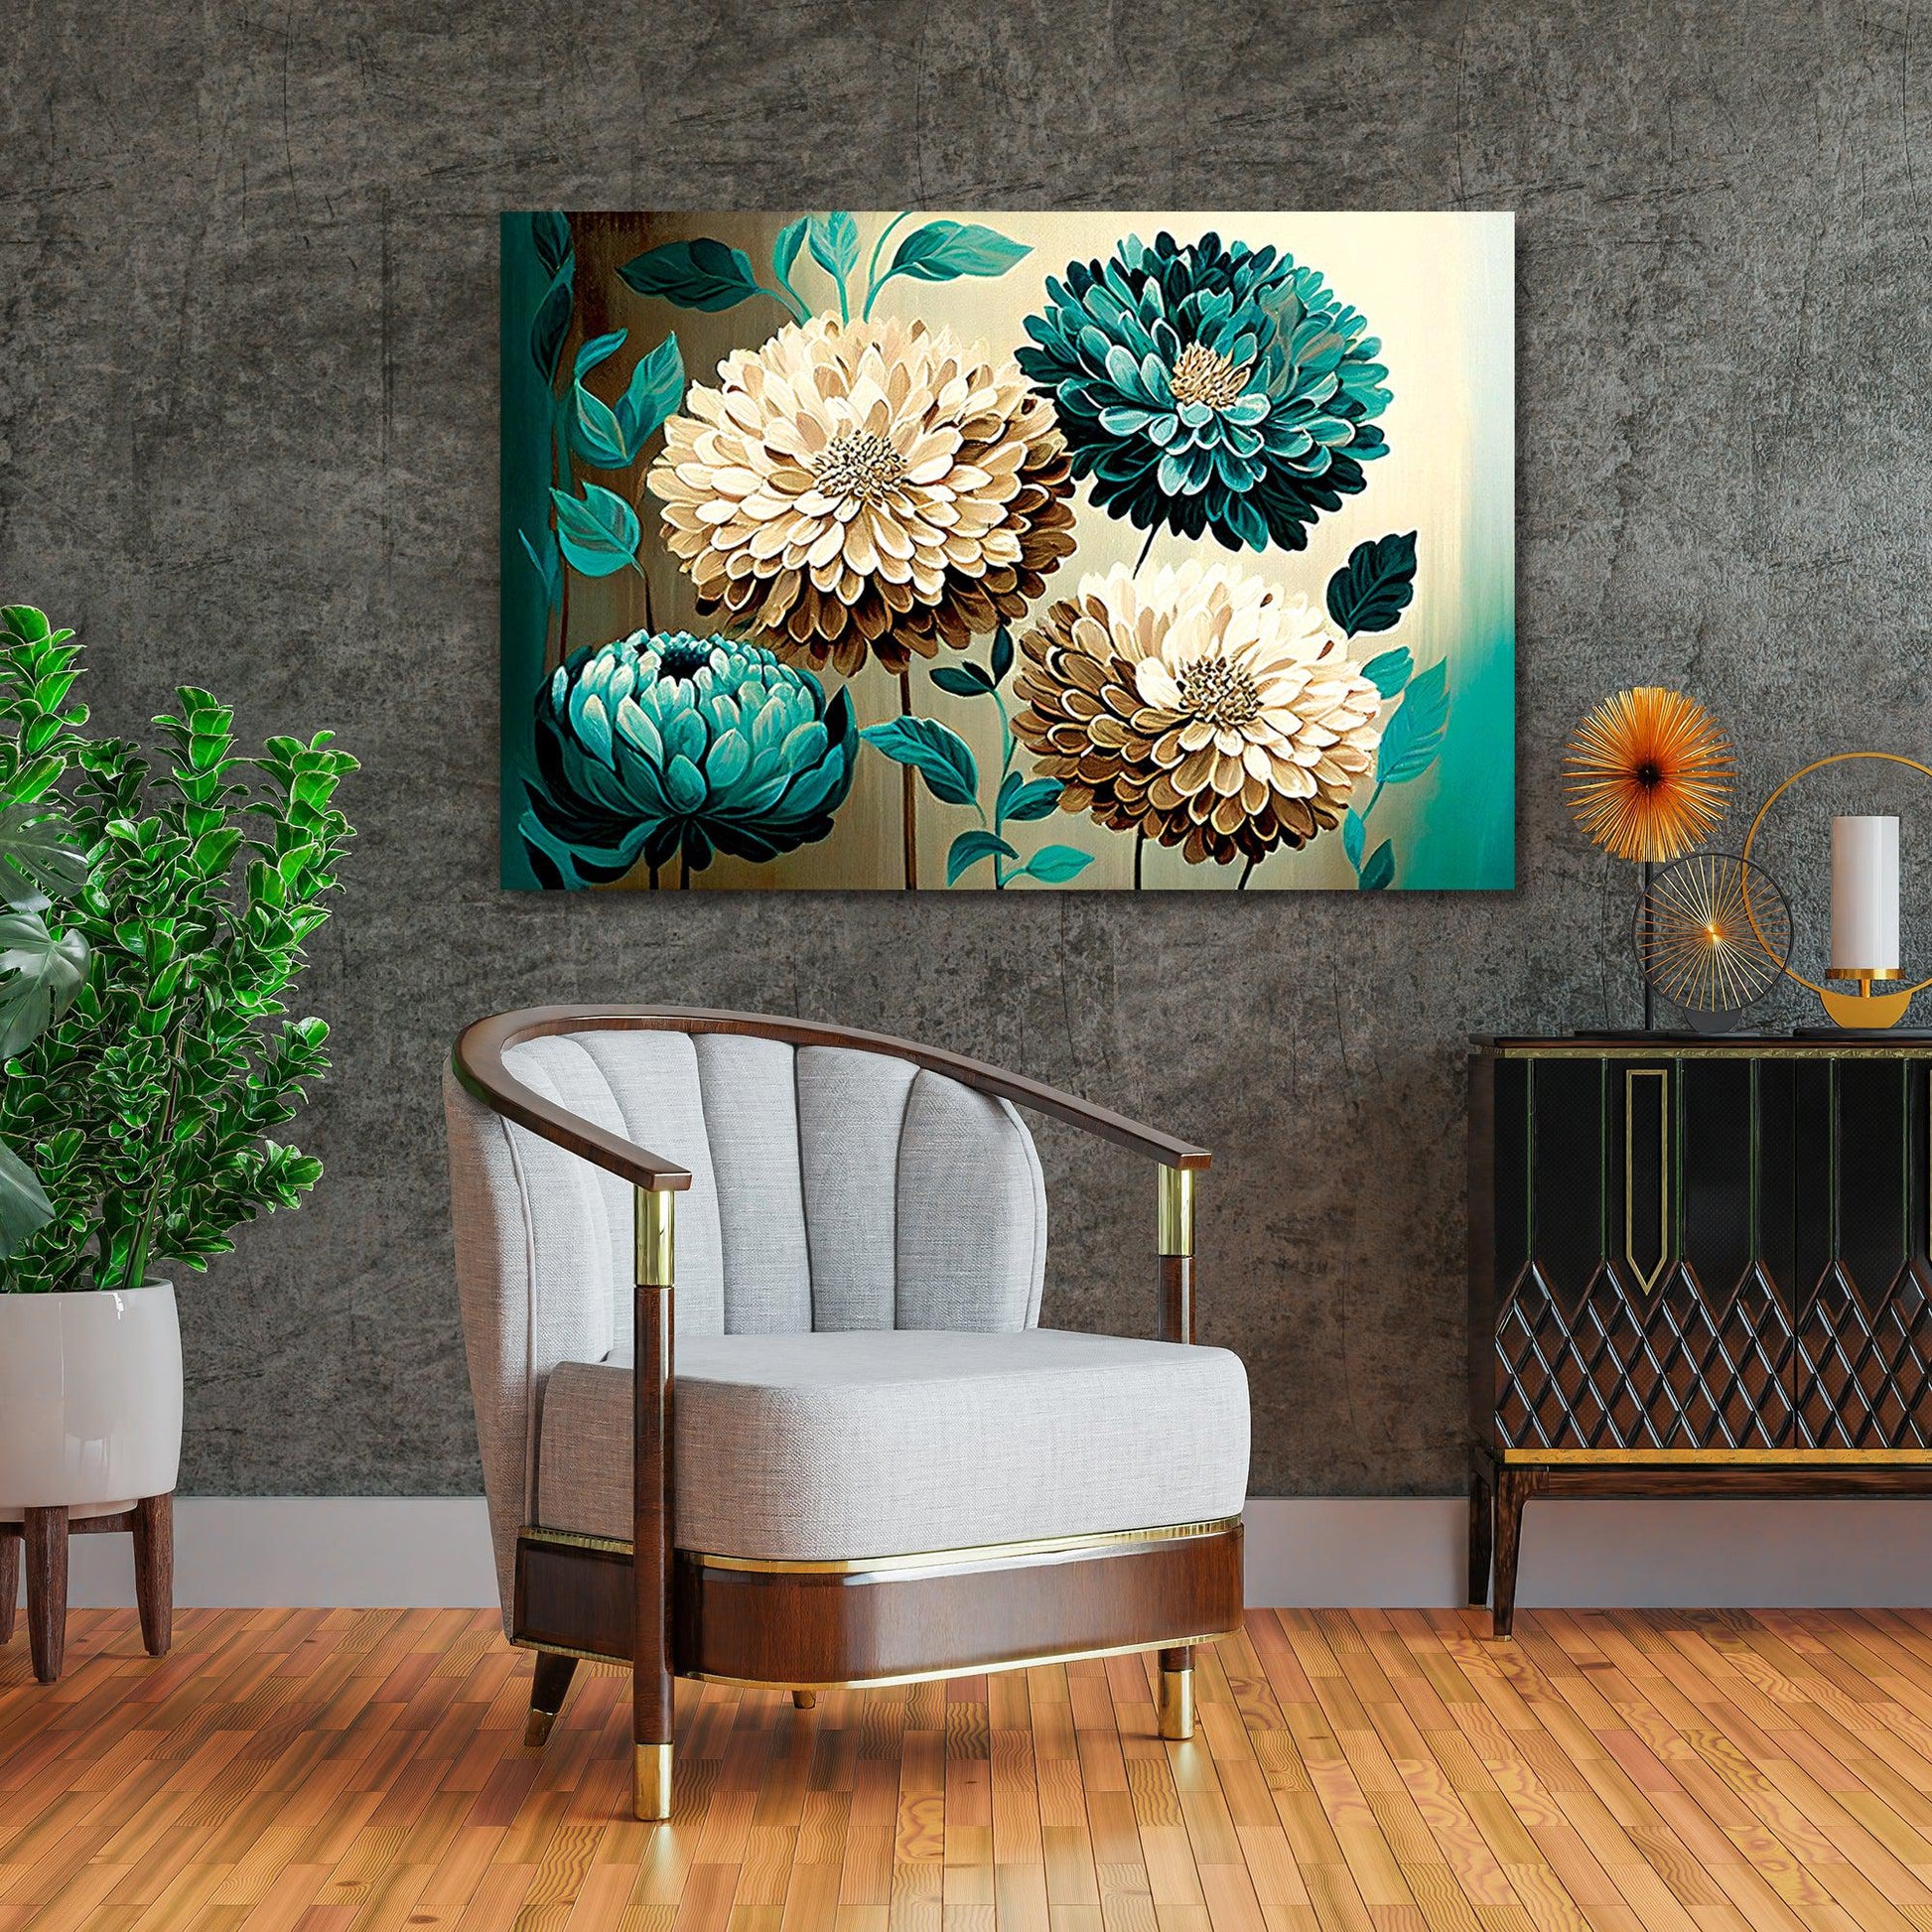 Floral Canvas Painting - Vibrant Large Canvas Art for Wall Decor